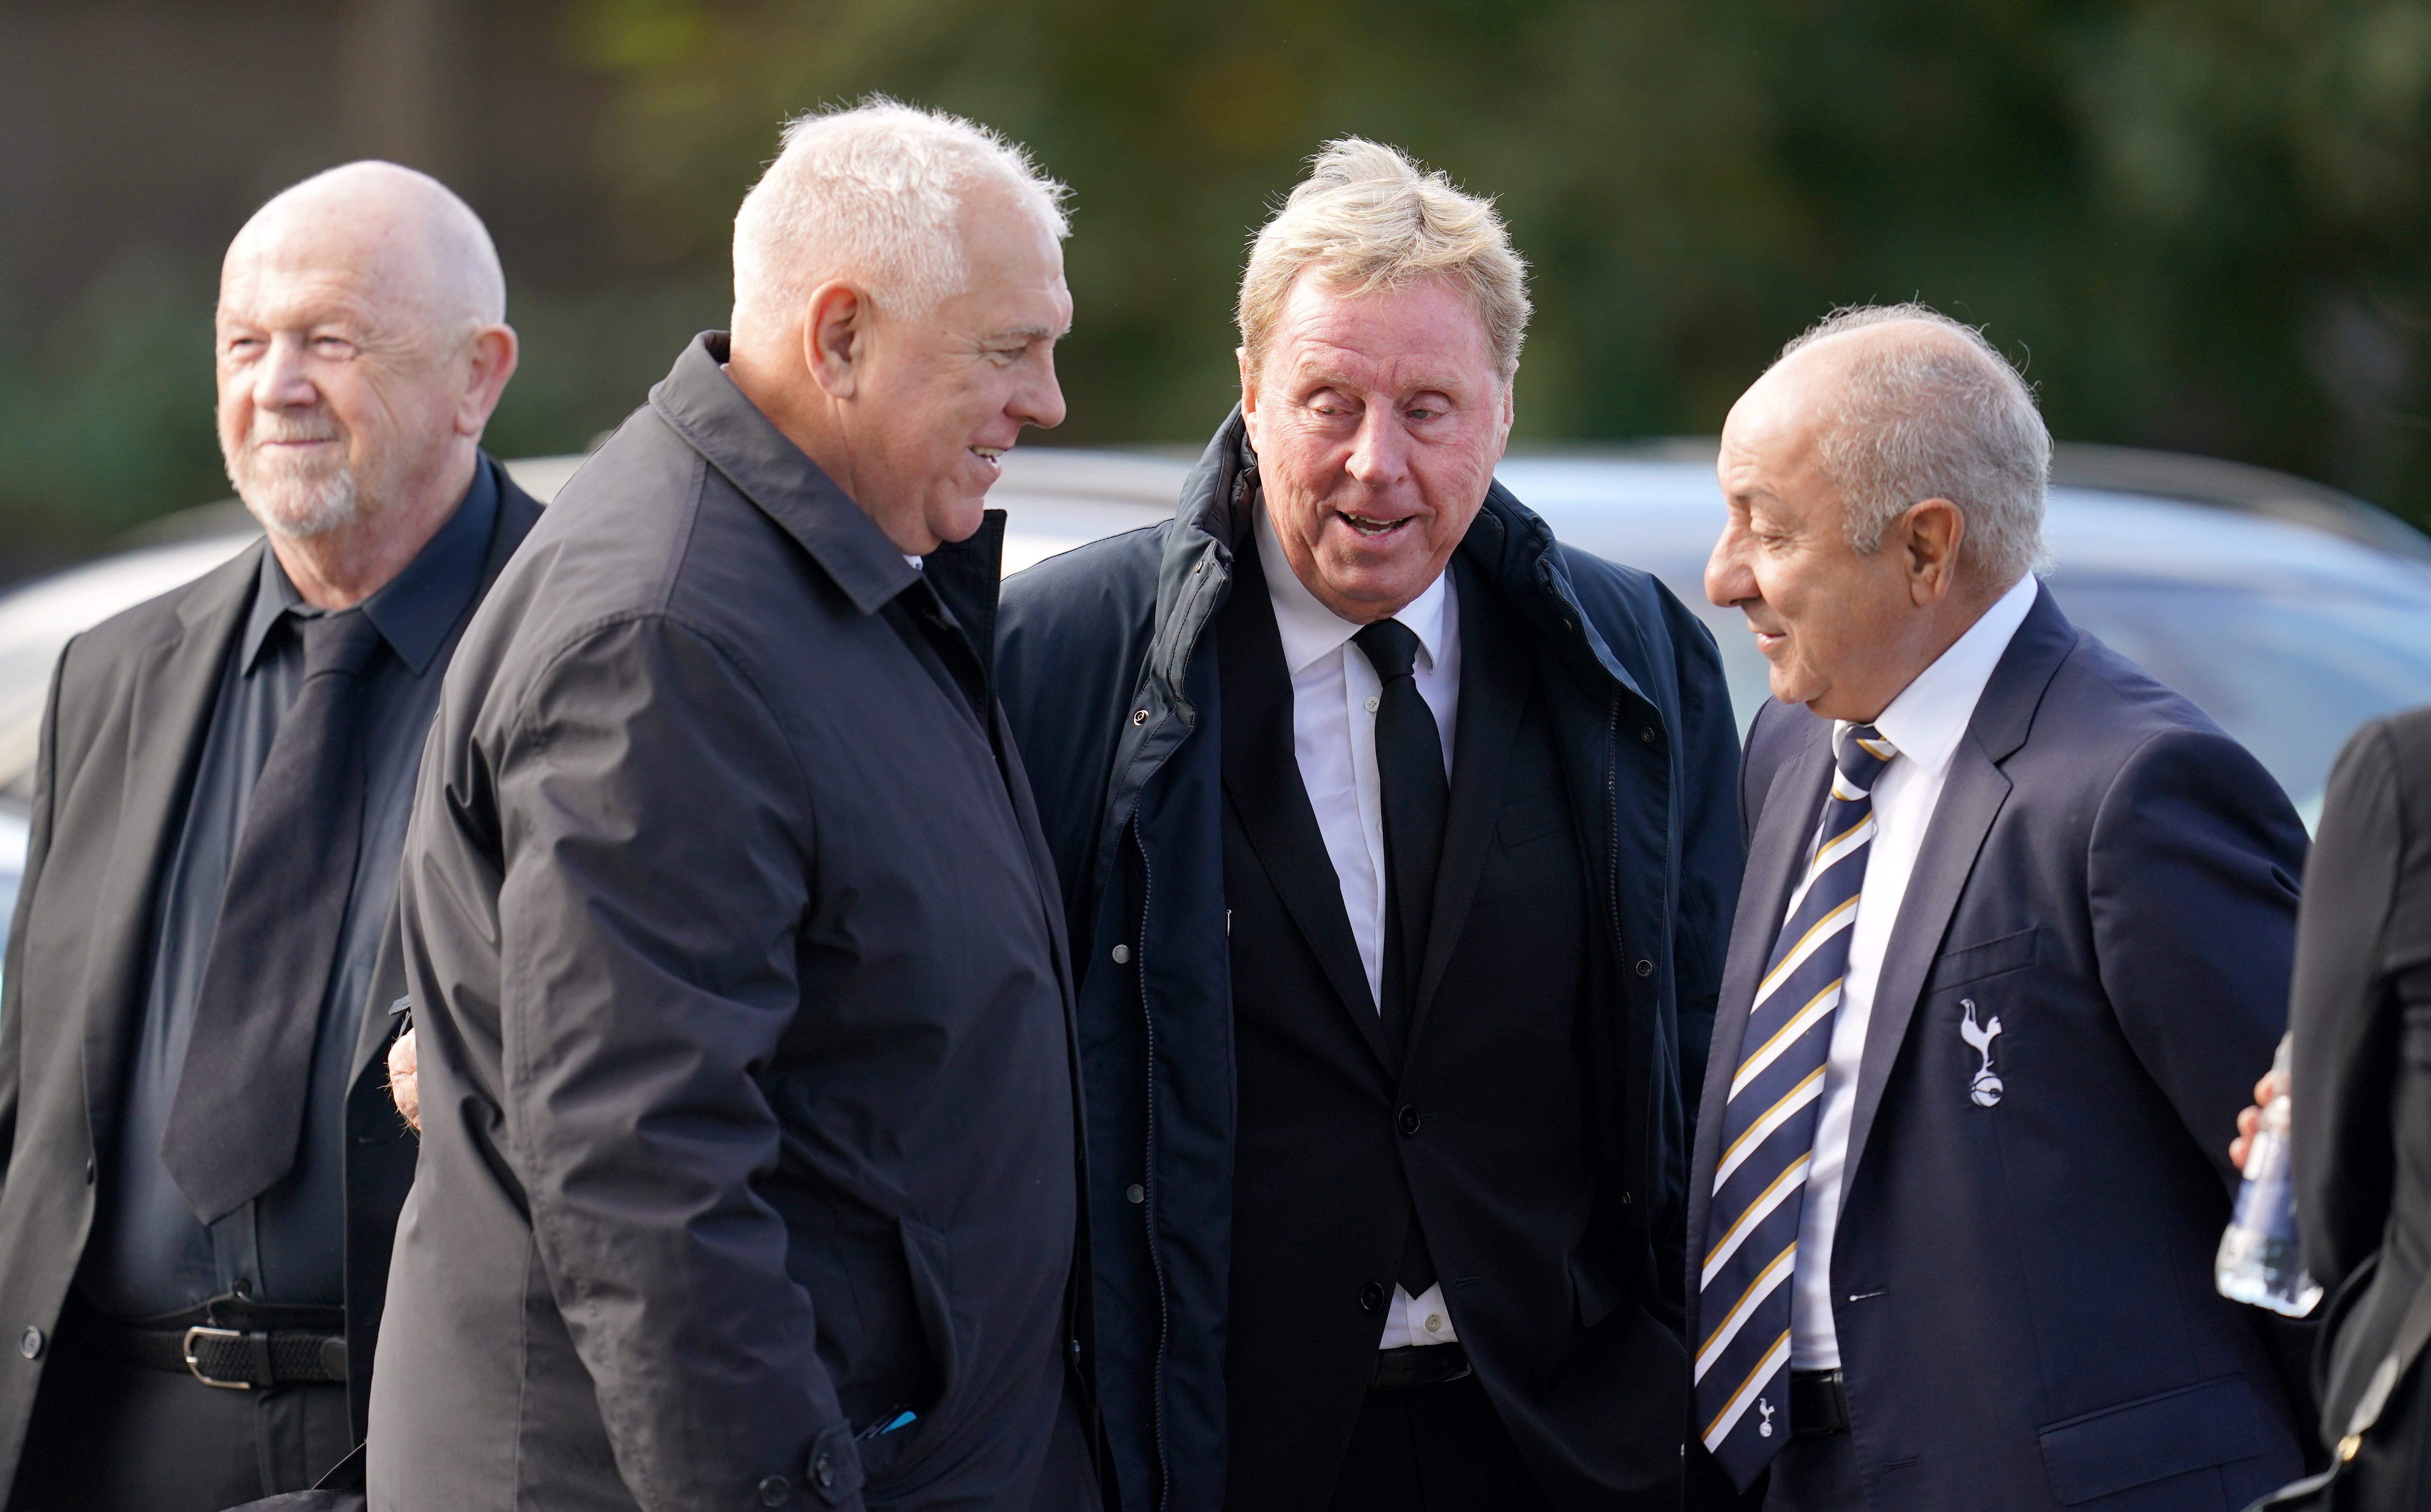 Former Tottenham manager Harry Redknapp (centre) with former Tottenham players Graham Roberts (second left) and Ossie Ardiles (right) (Nick Potts/PA)